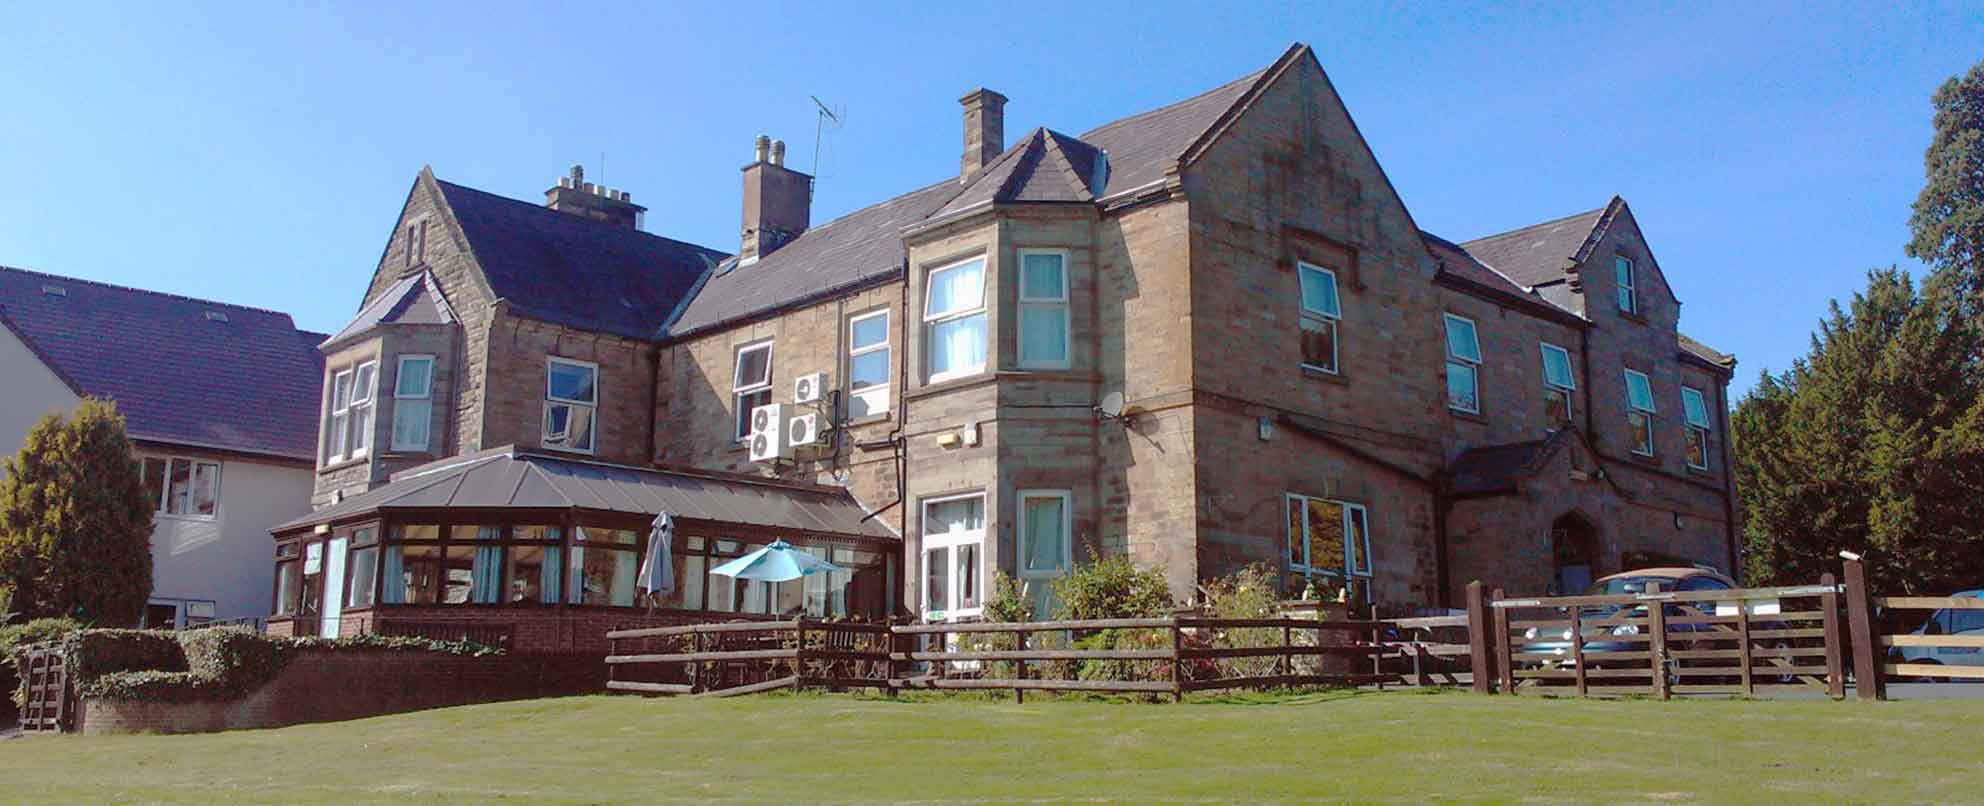 Lynhales Hall Care Home